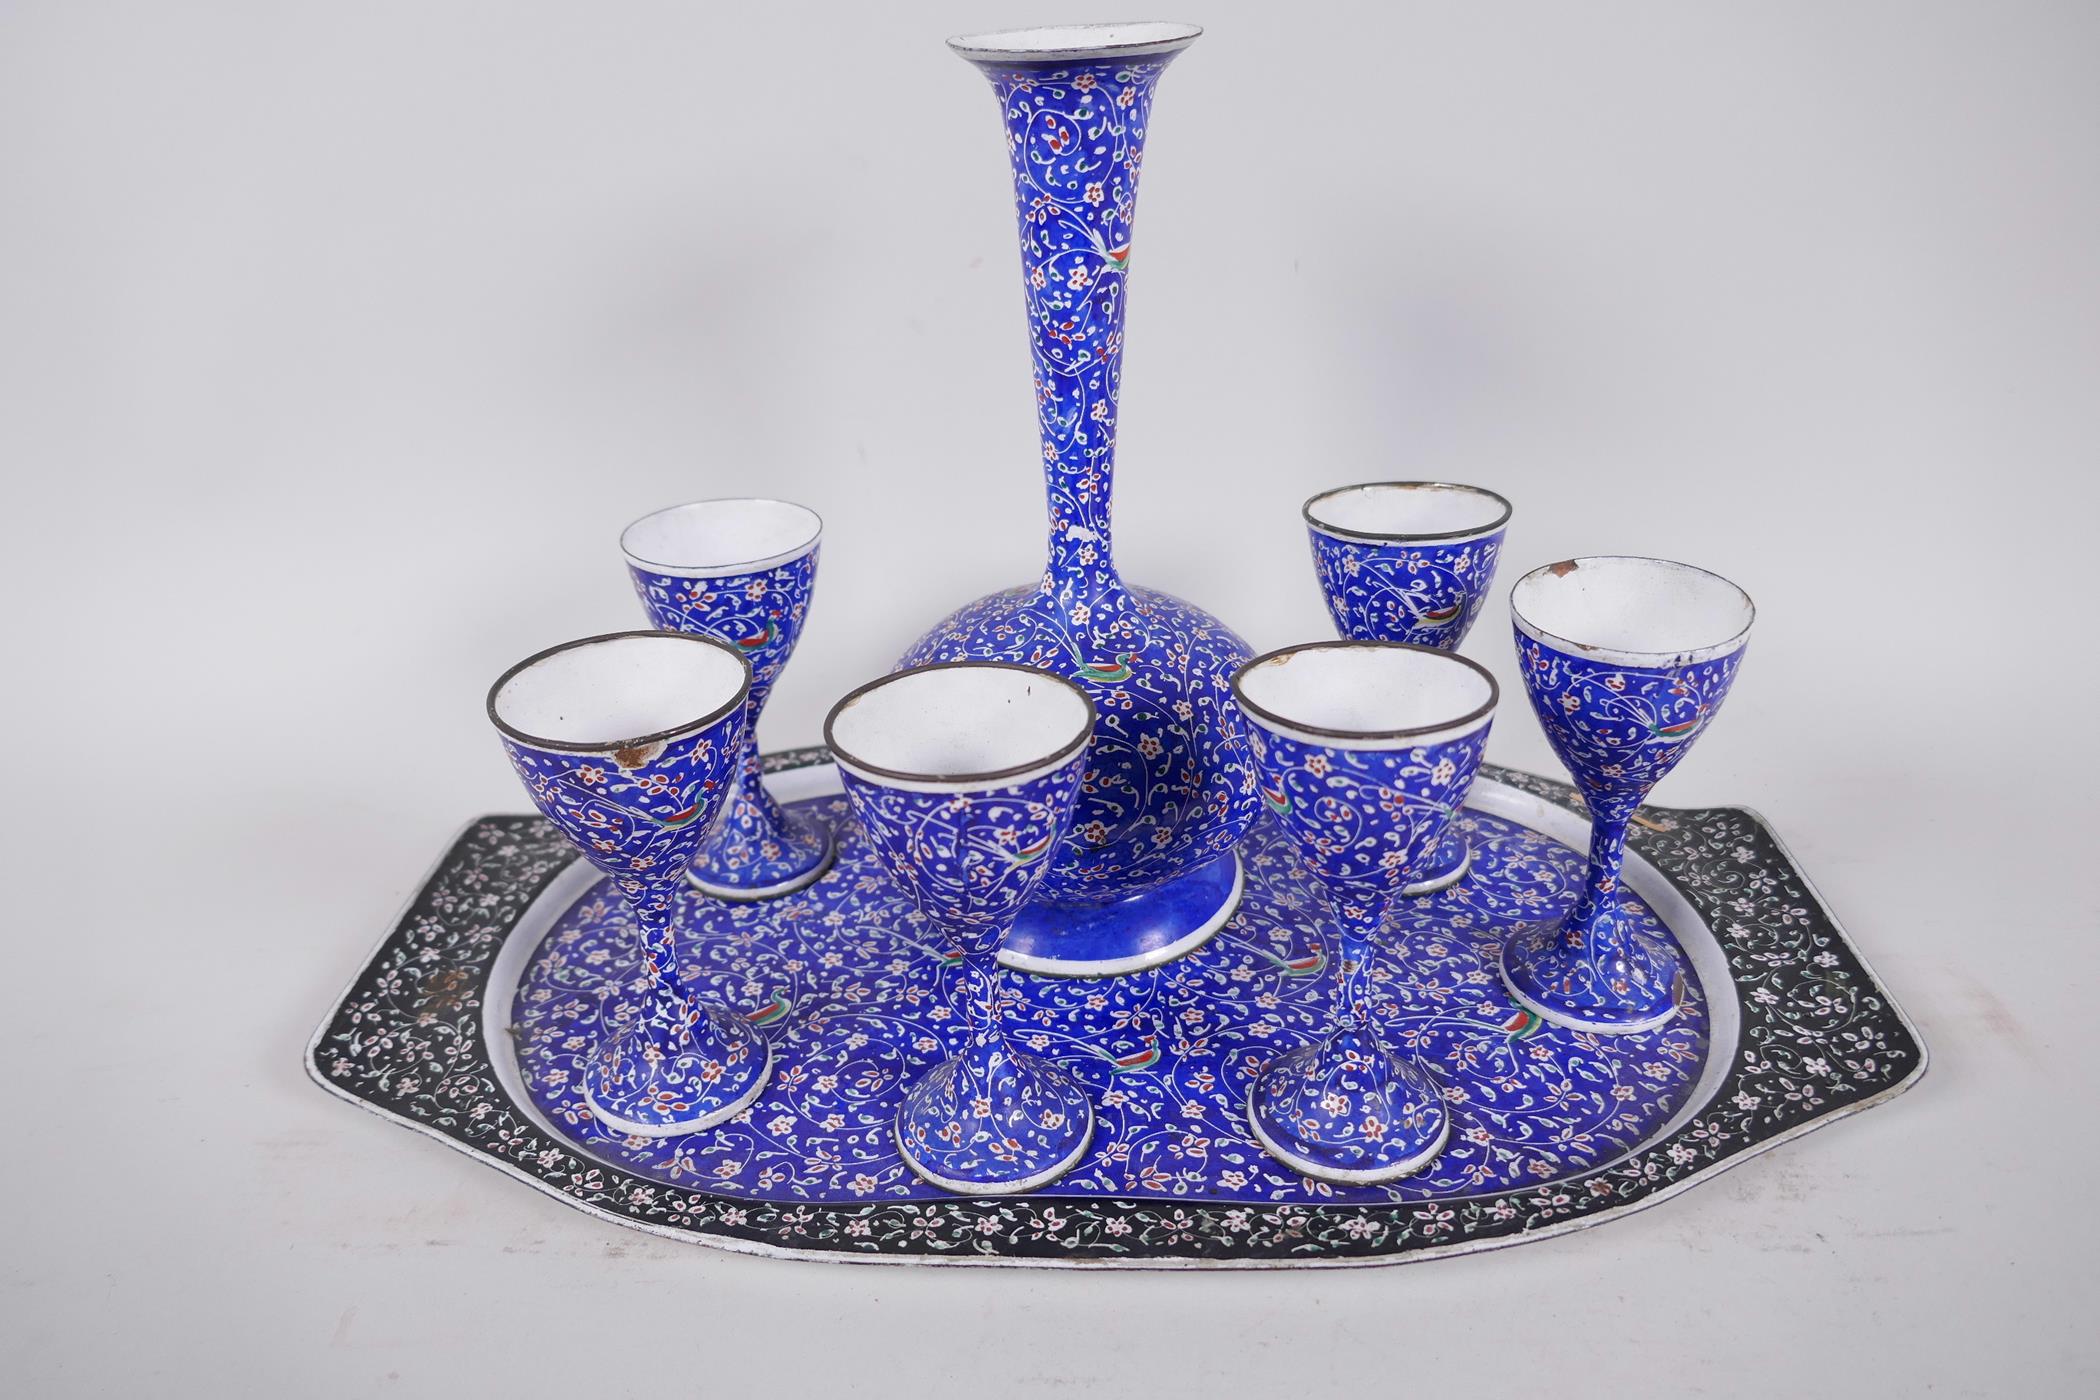 An Indian enamel wine set of carafe and six stem cups on a tray, carafe 7½" high